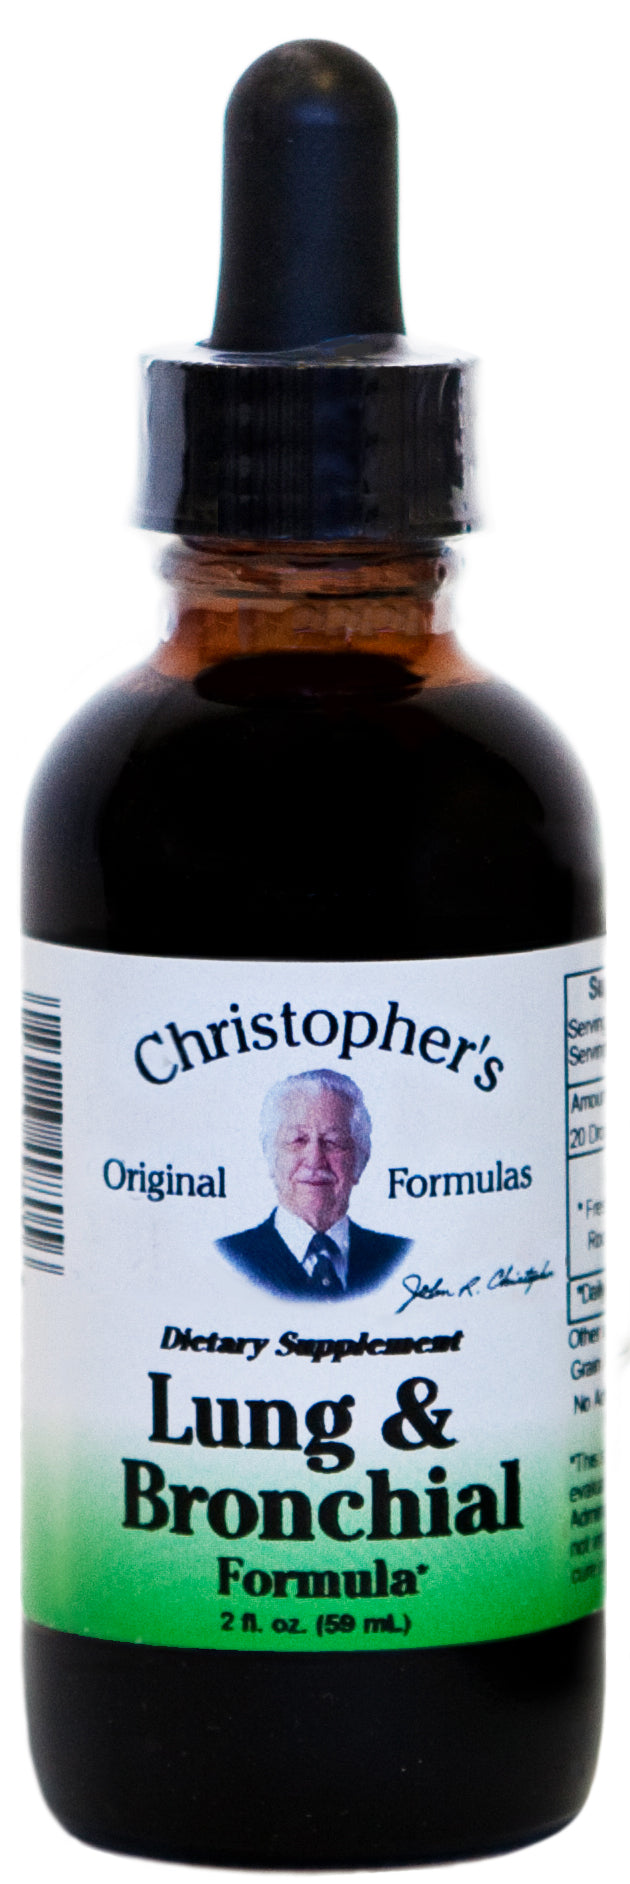 Dr. Christopher's Lung & Bronchial Formula Extract